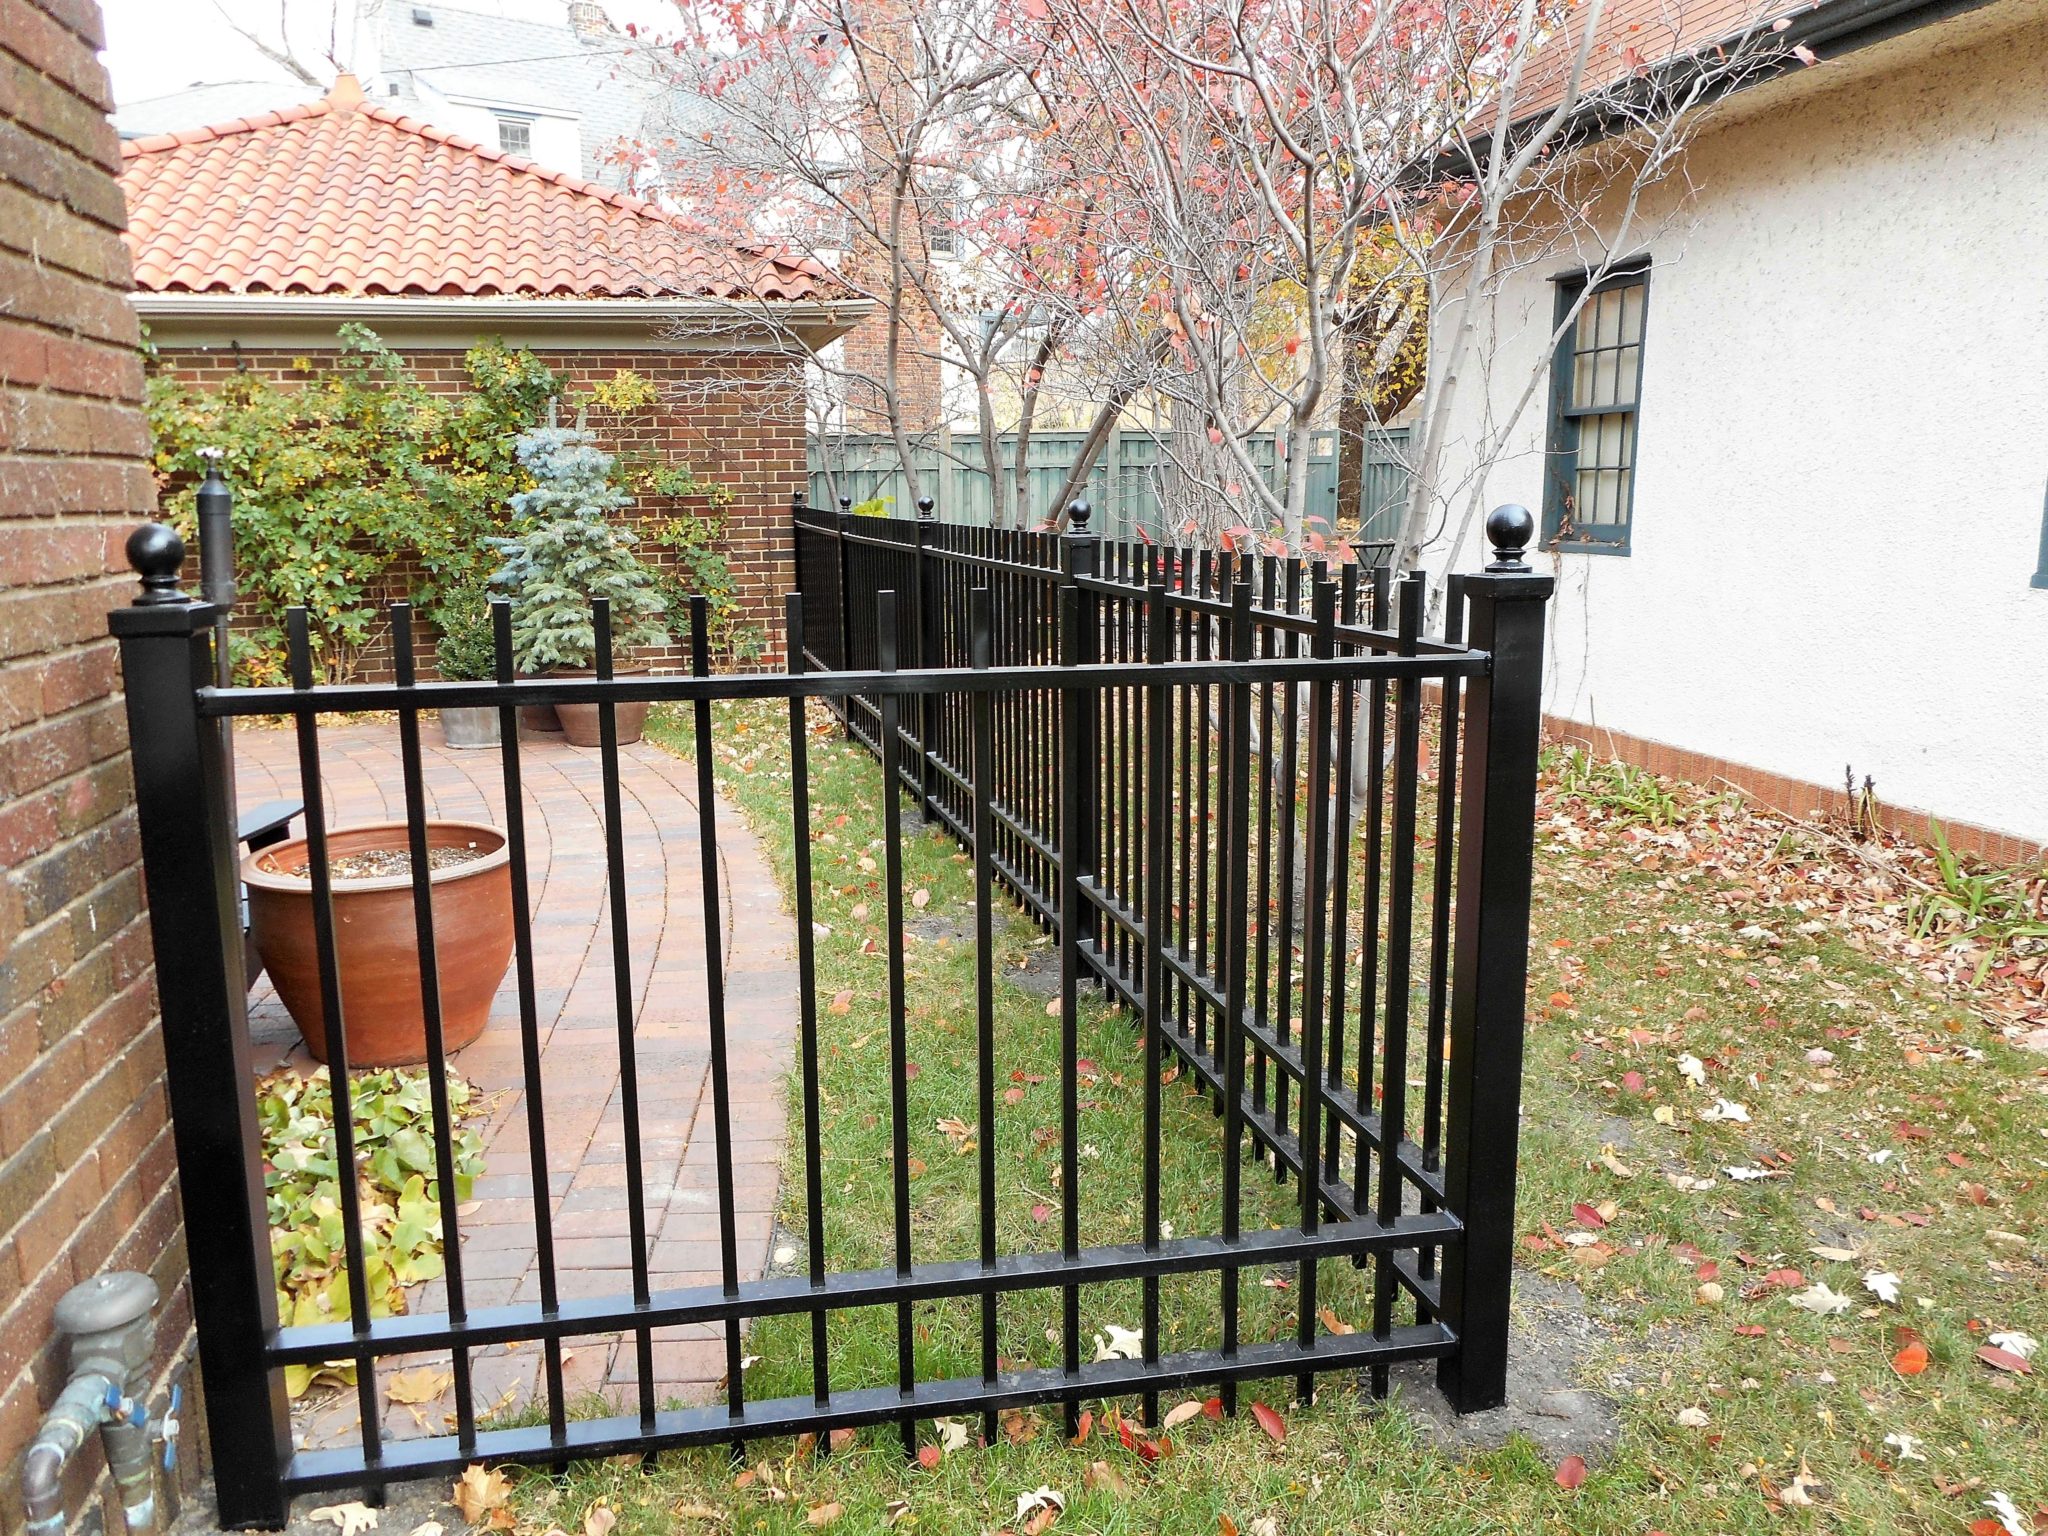 Plymouth Iron Fence Surpasses - curb appeal